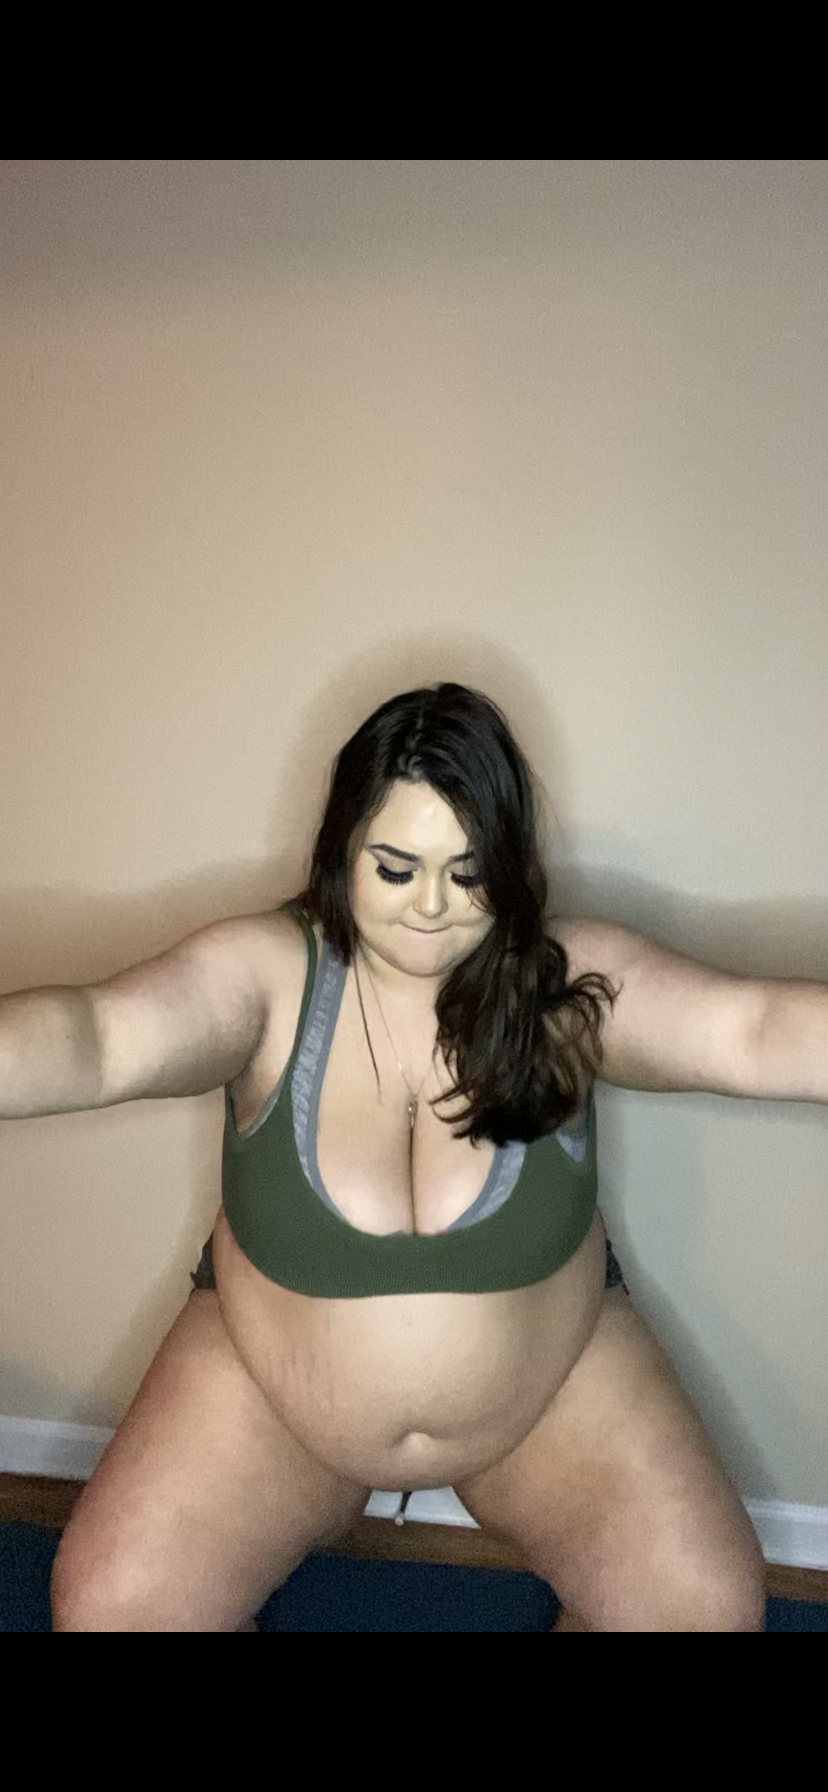 View the topic Video Workout Fail (Curvy BBW). 